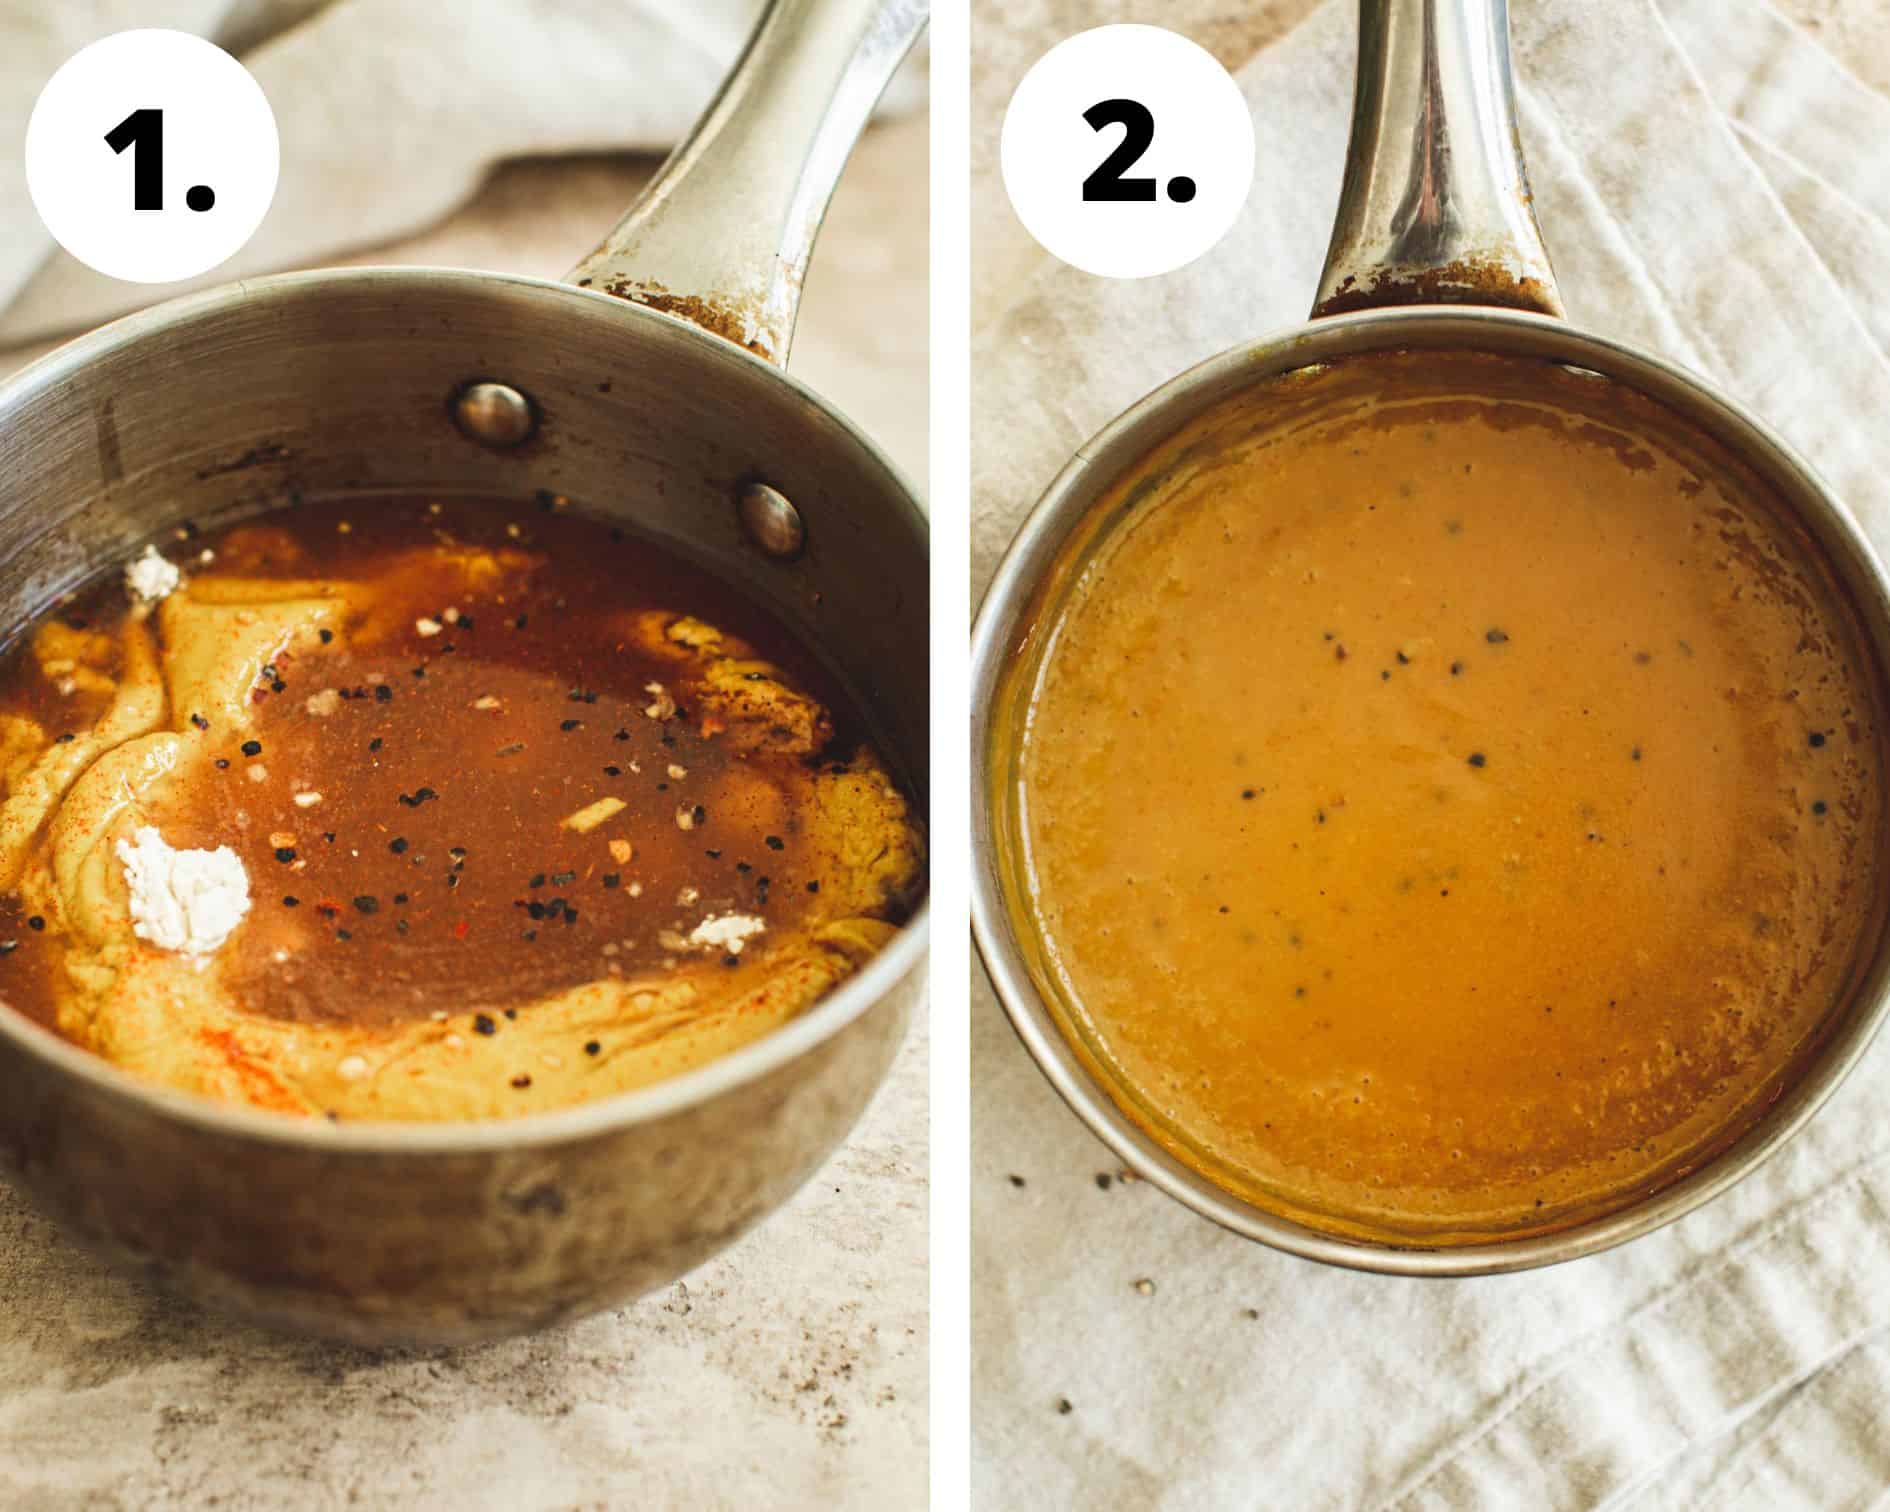 Mustard bbq sauce process steps 1 and 2.